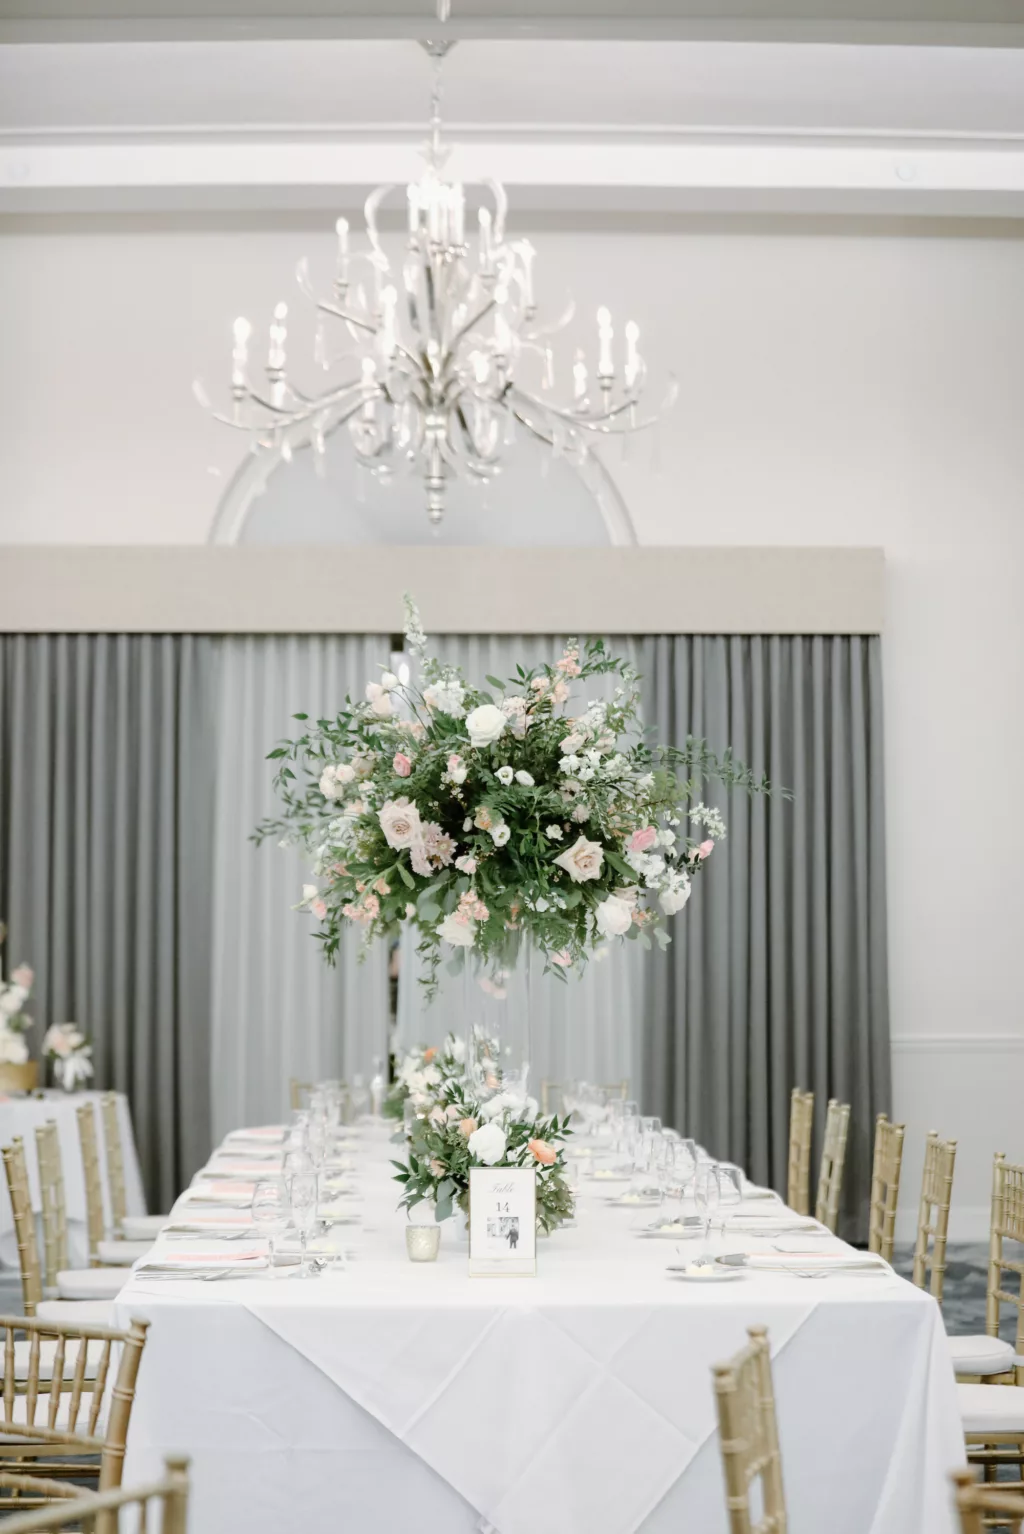 White and Gold Grand Ballroom Wedding Reception Ideas | Tall Flower Stand with White and Pink Roses, and Greenery Centerpiece Decor Inspiration | Tampa Bay Event Venue The Don Cesar